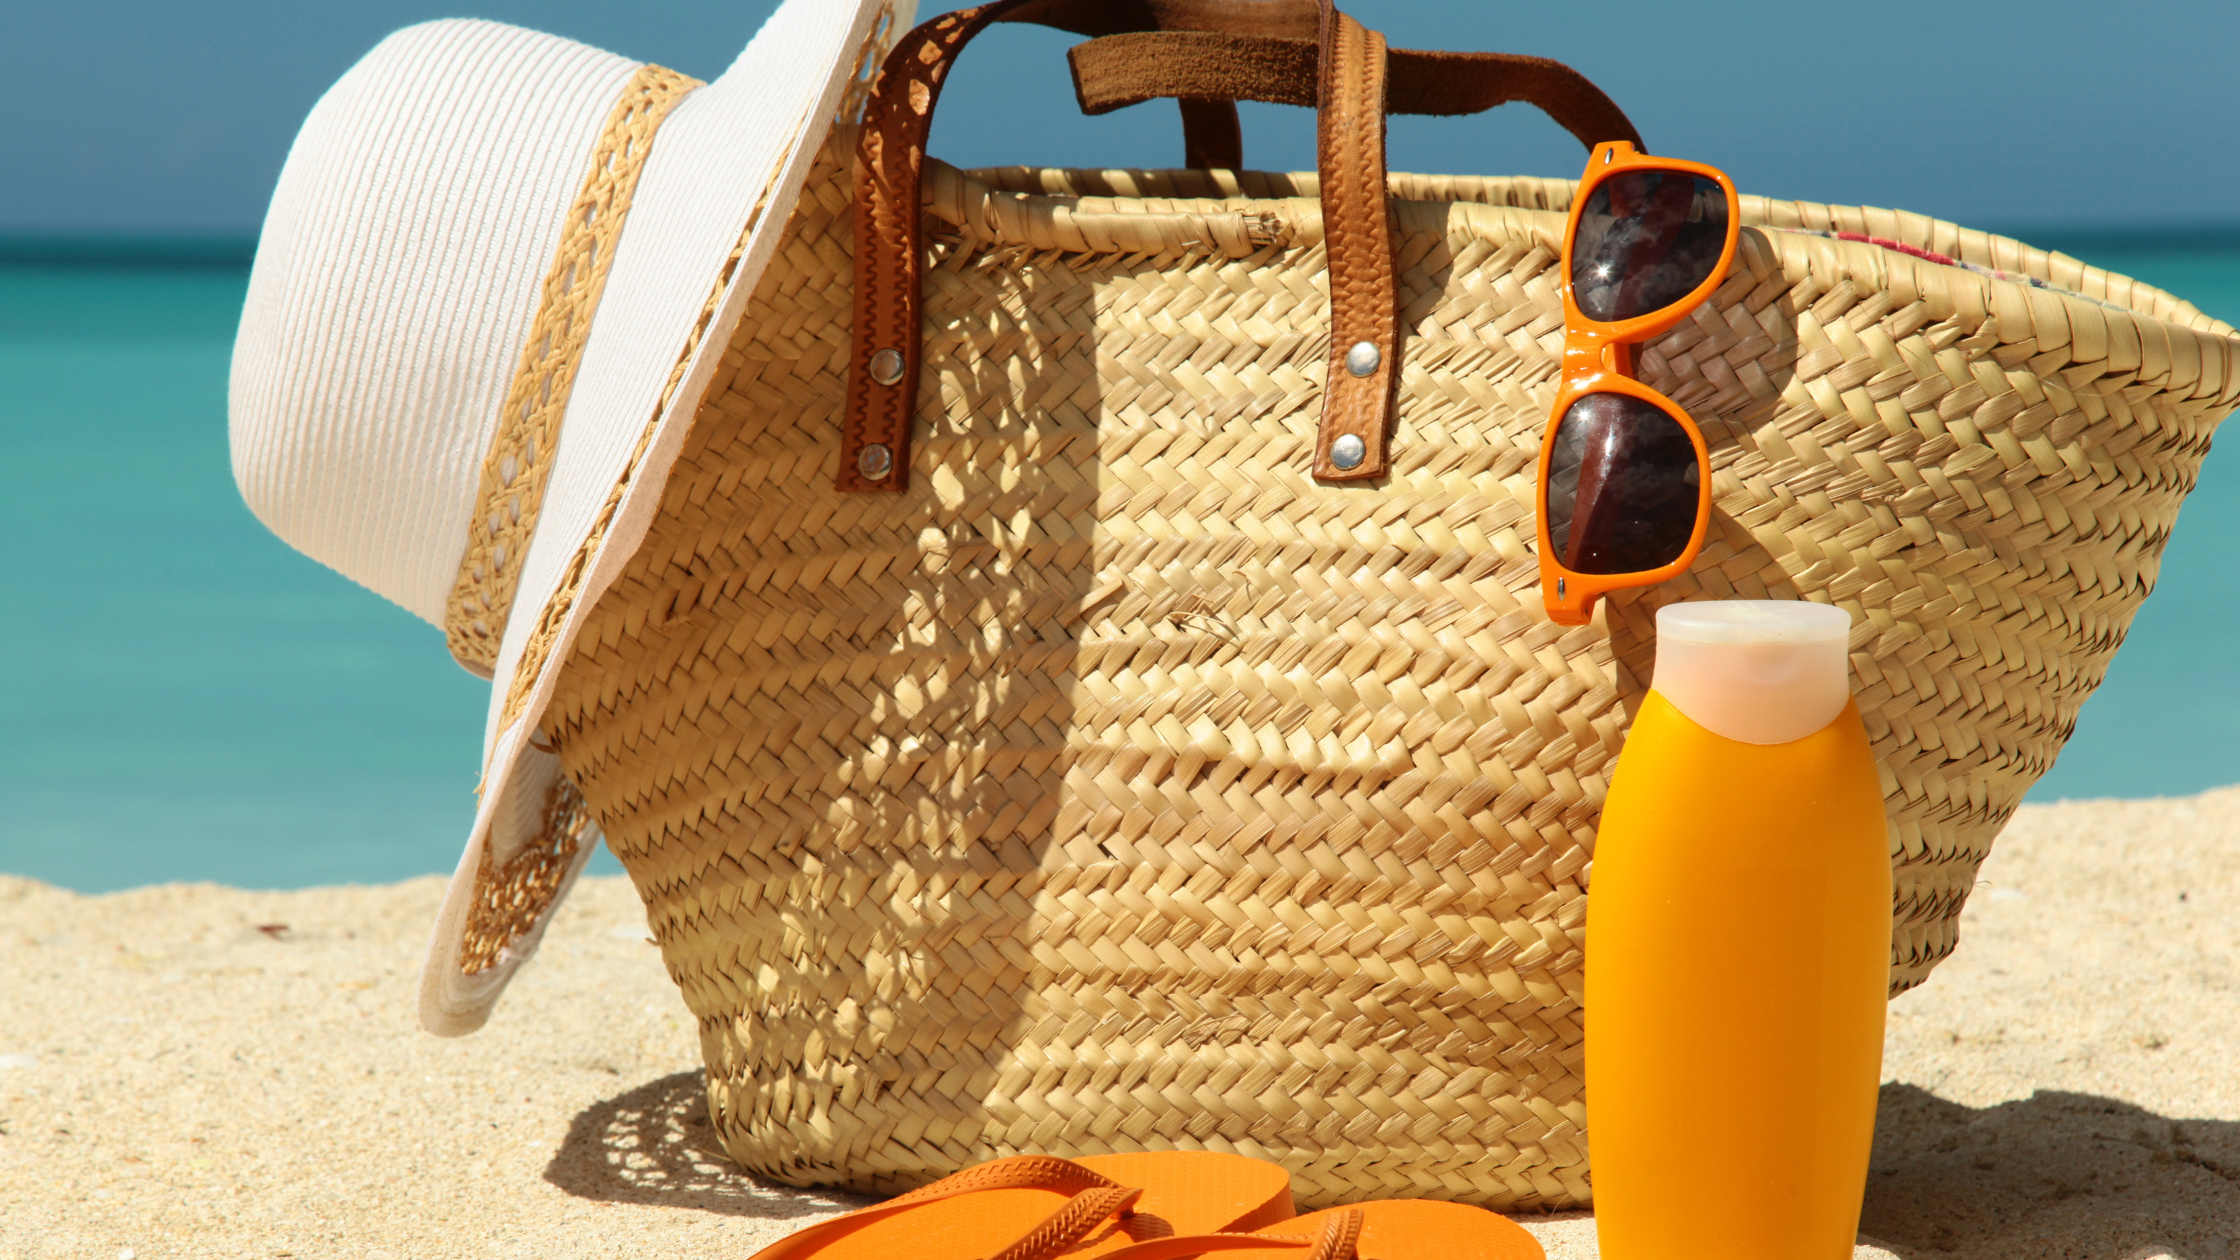 bag with a hat and sunglasses sitting next to a bottle of sunscreen